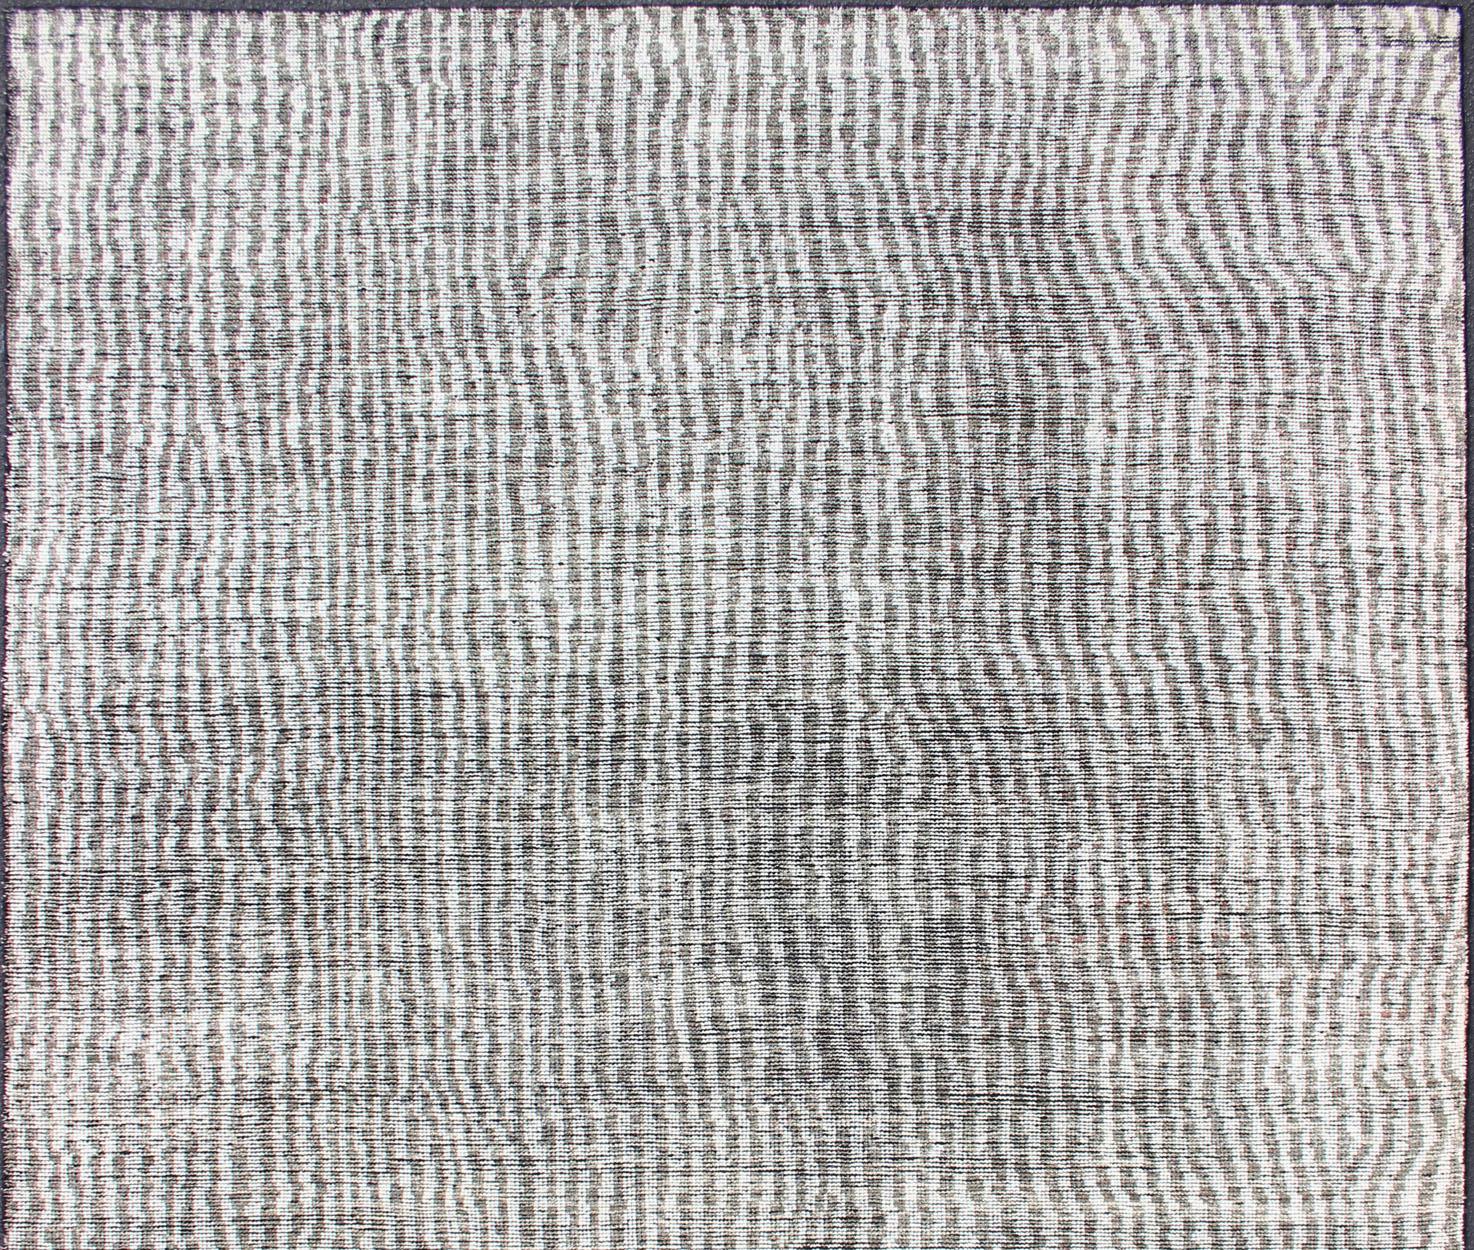 Shades of white and taupe/green modern distressed piled rug, Keivan Woven Arts rug KHN-1030-TR-578, country of origin / type: India / Distressed Modern Piled Rug.

This distressed modern design is inspired by minimalism in modern design. With a